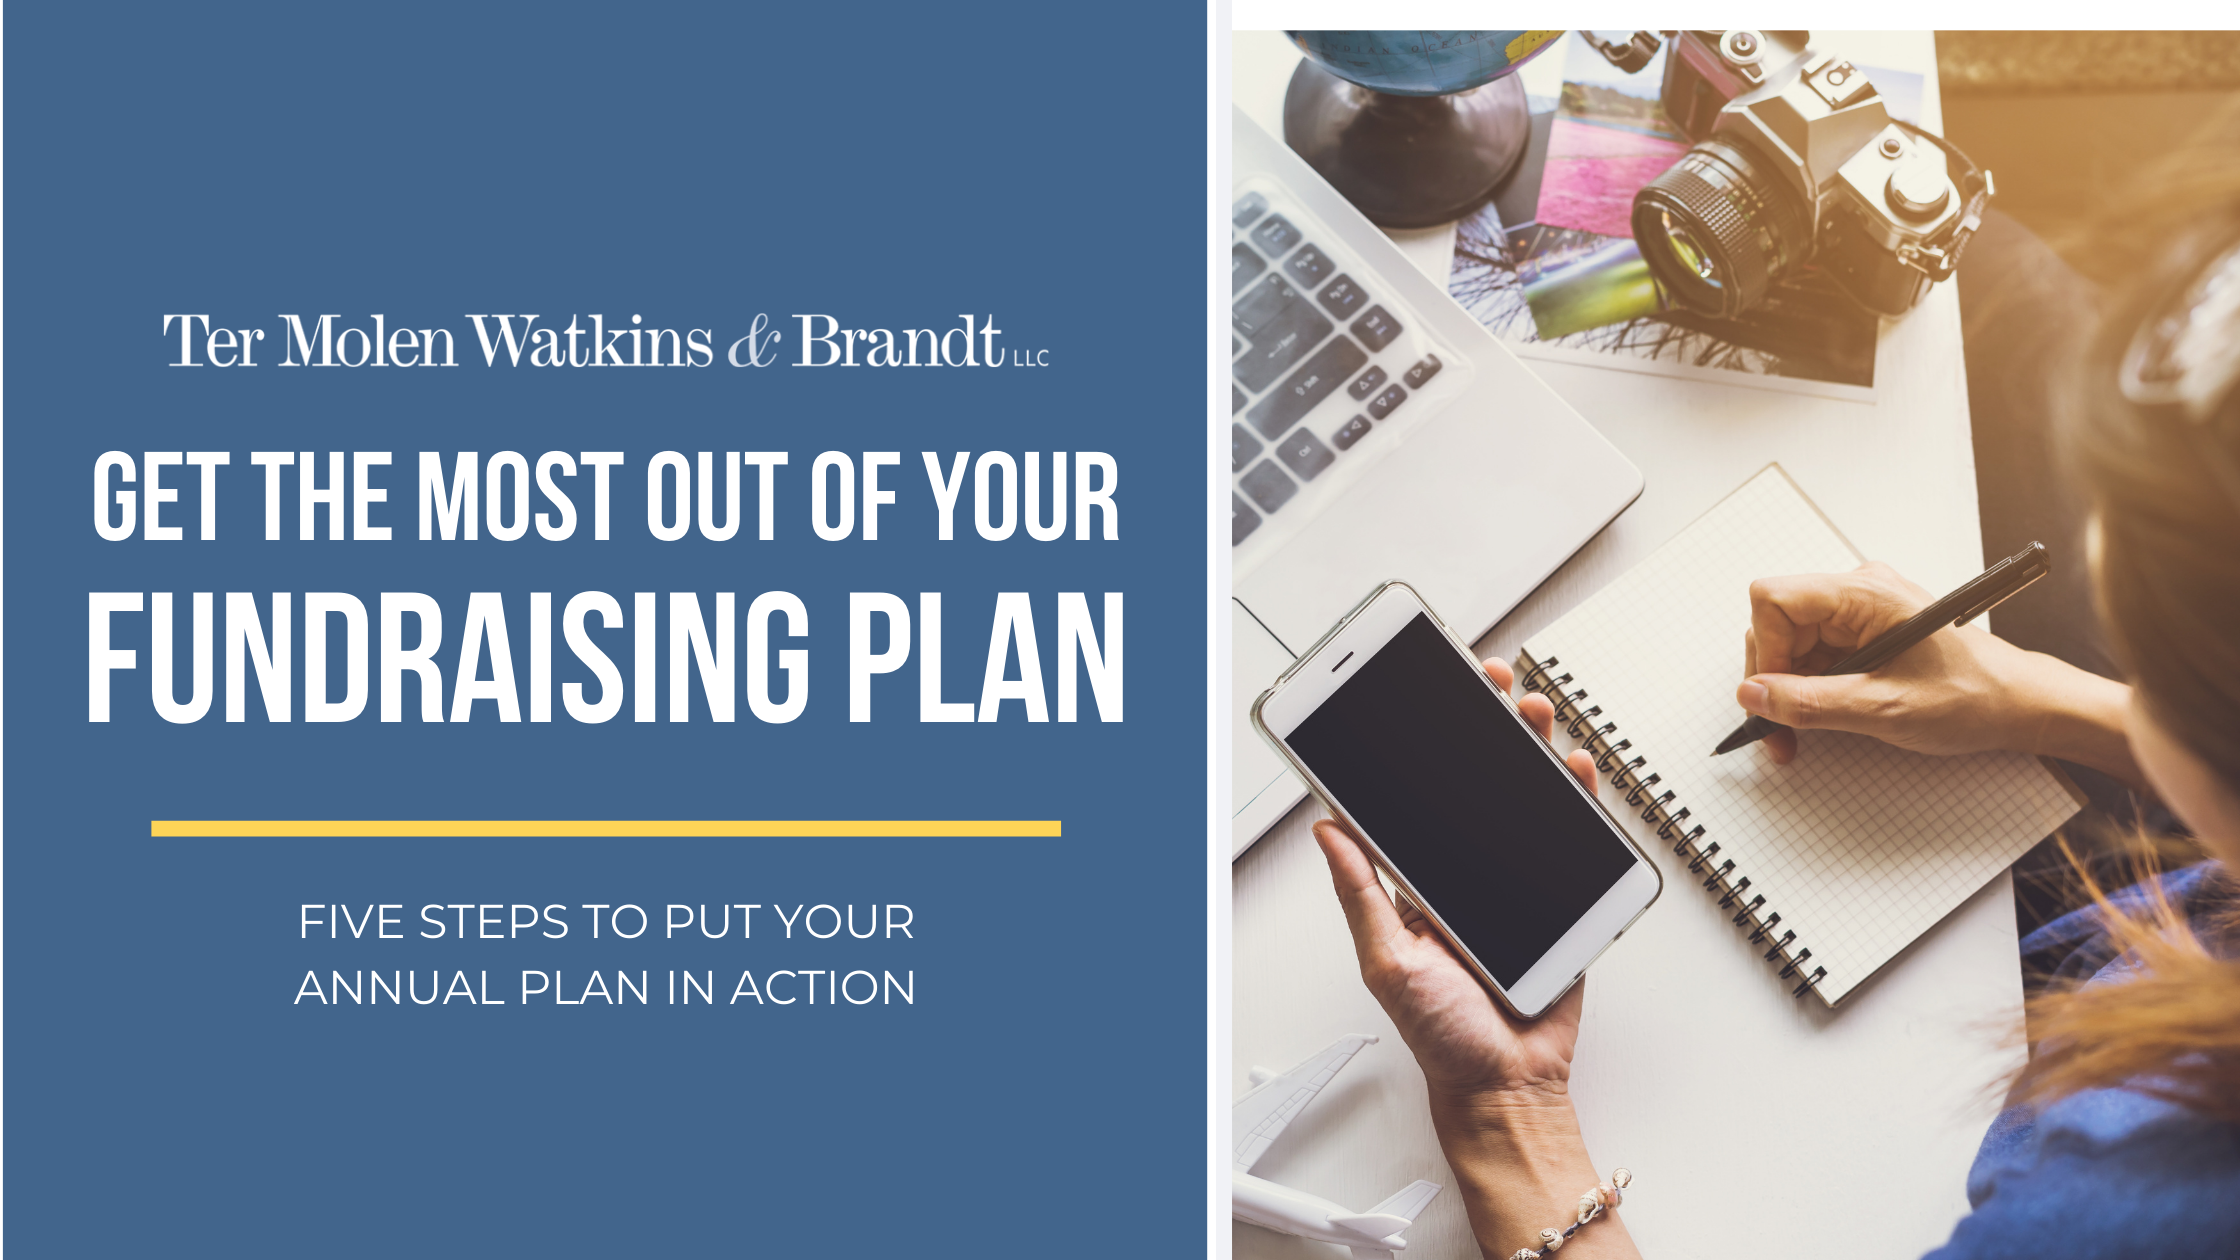 How to Get the Most Out of Your Fundraising Plan